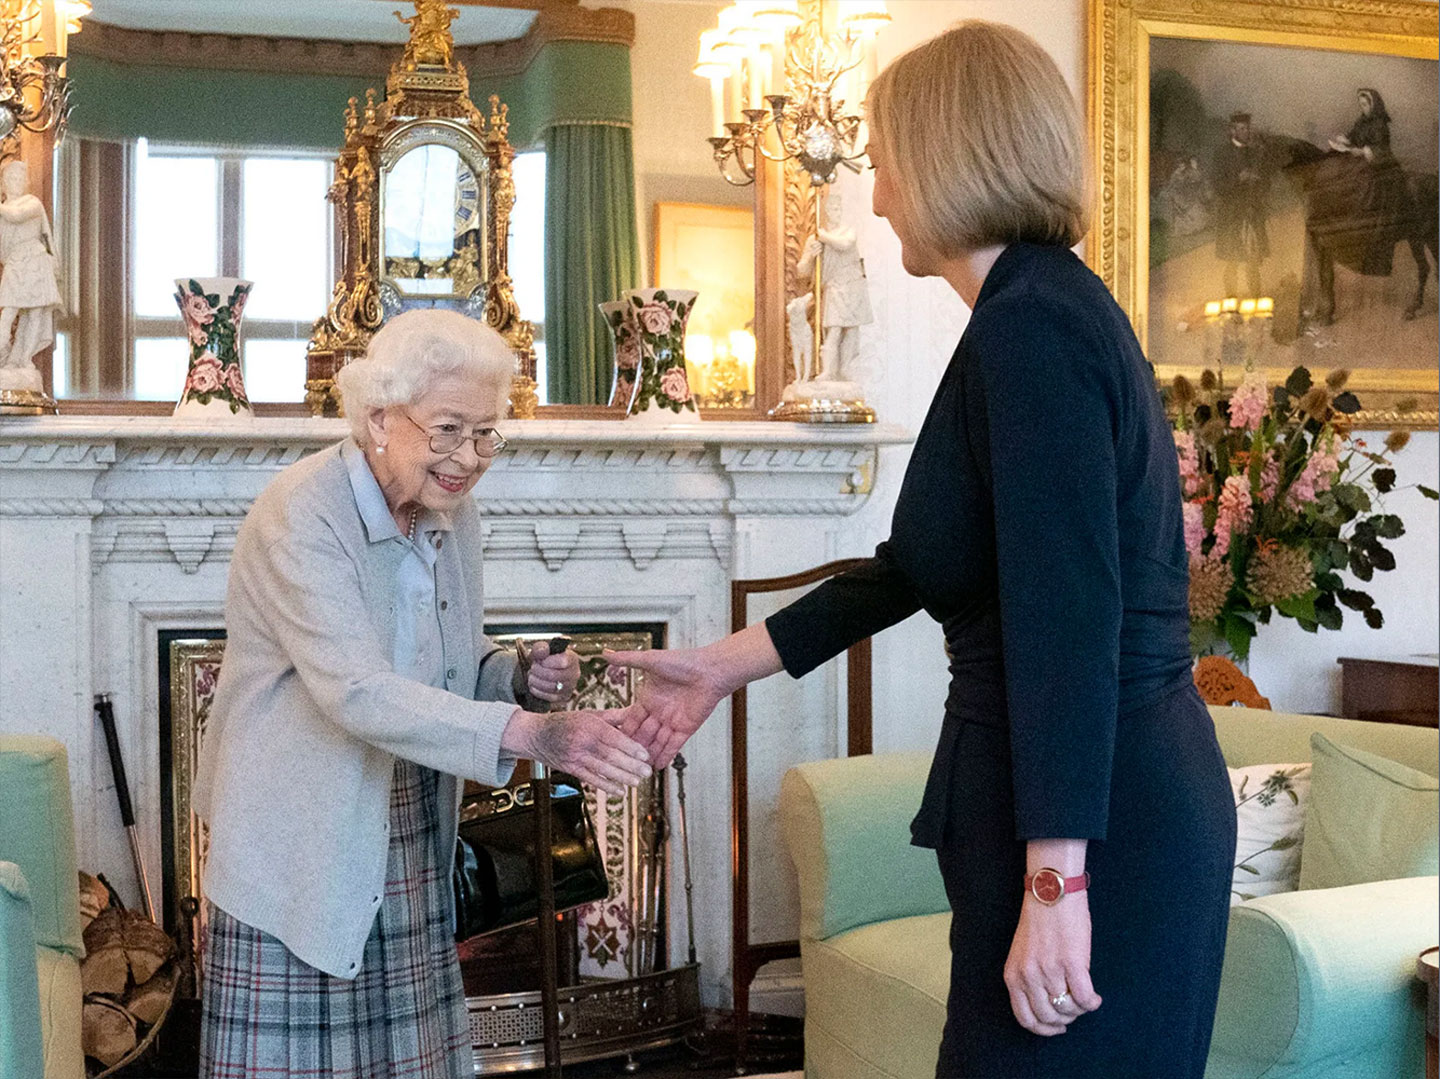 Queen Elizabeth greets newly elected leader of the Conservative party Liz Truss as she arrives at Balmoral Castle for an audience where she will be invited to become Prime Minister and form a new government on September 6, 2022 in Aberdeen, Scotland. The Queen broke with the tradition of meeting the new prime minister and Buckingham Palace, after needing to remain at Balmoral Castle due to mobility issues